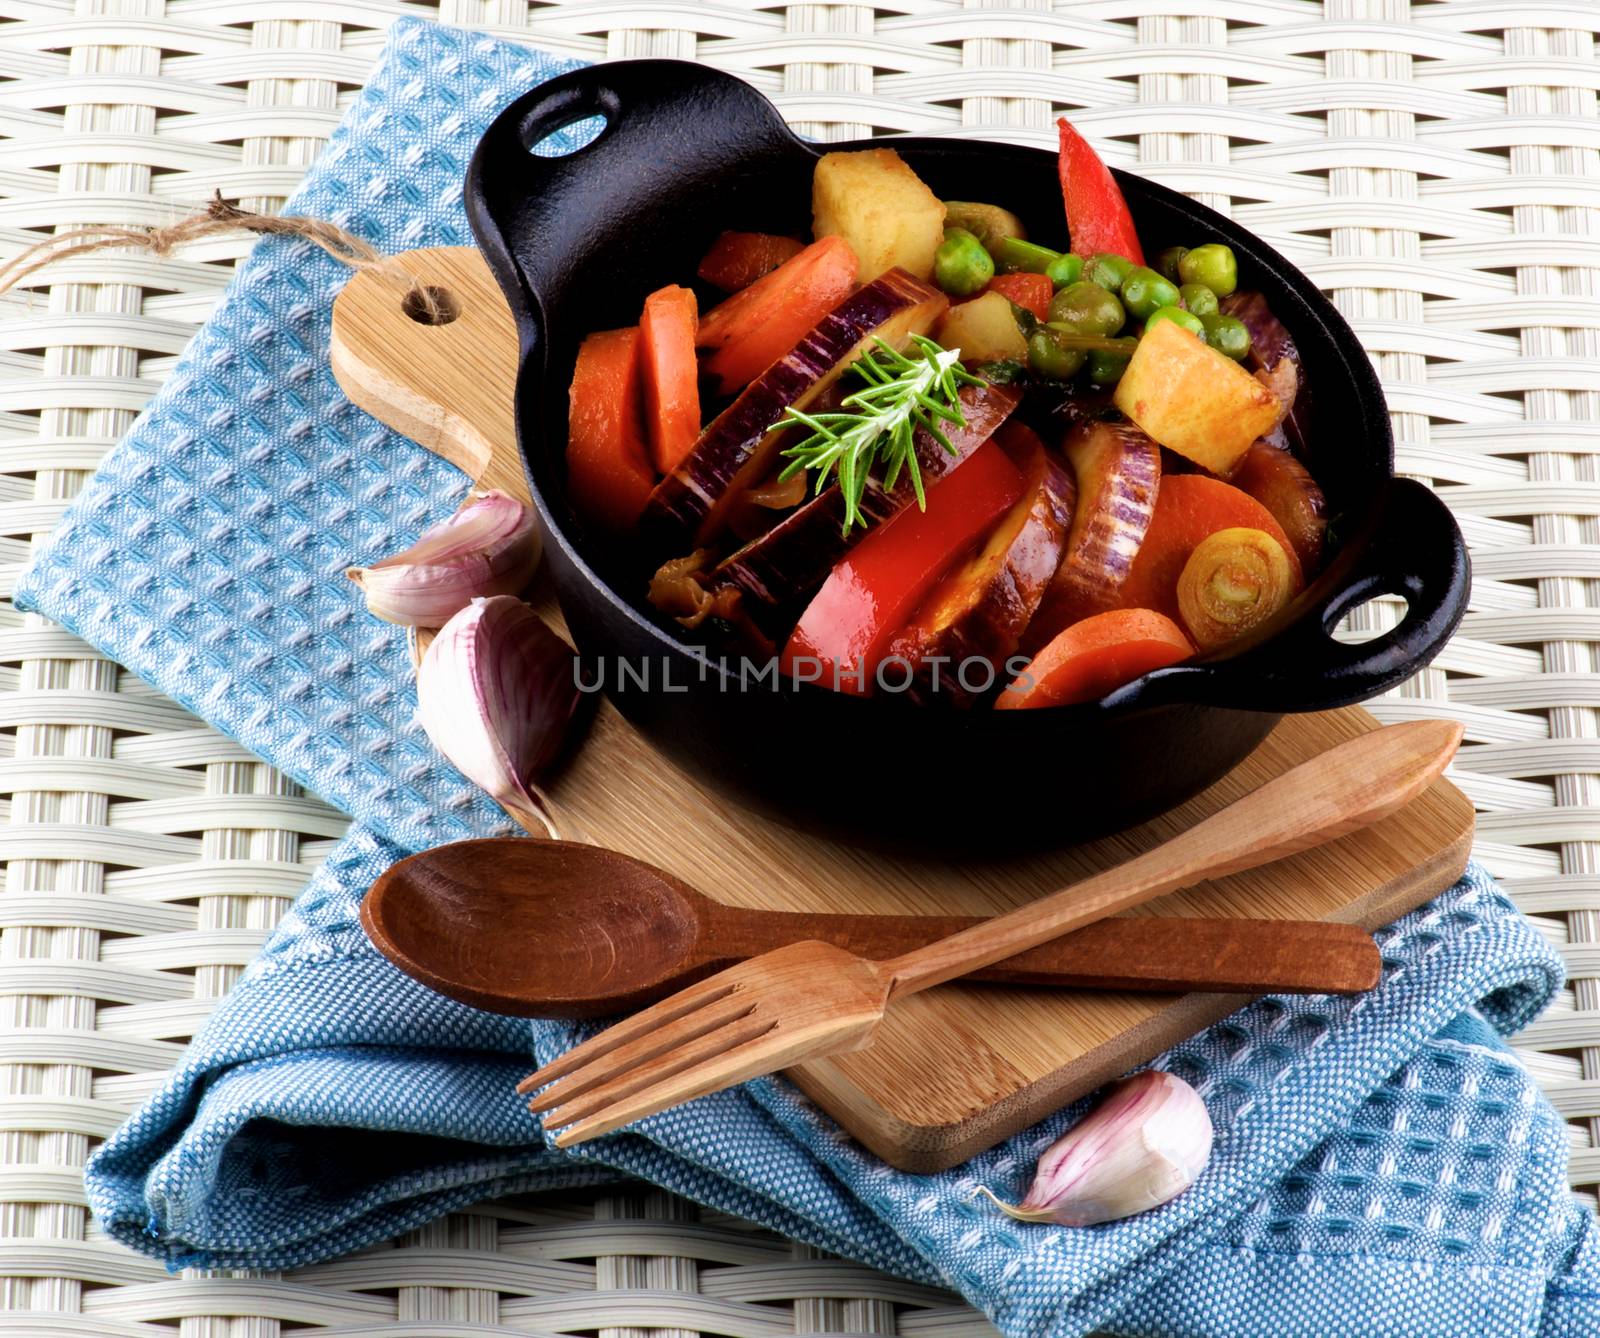 Colorful Vegetables Ragout by zhekos